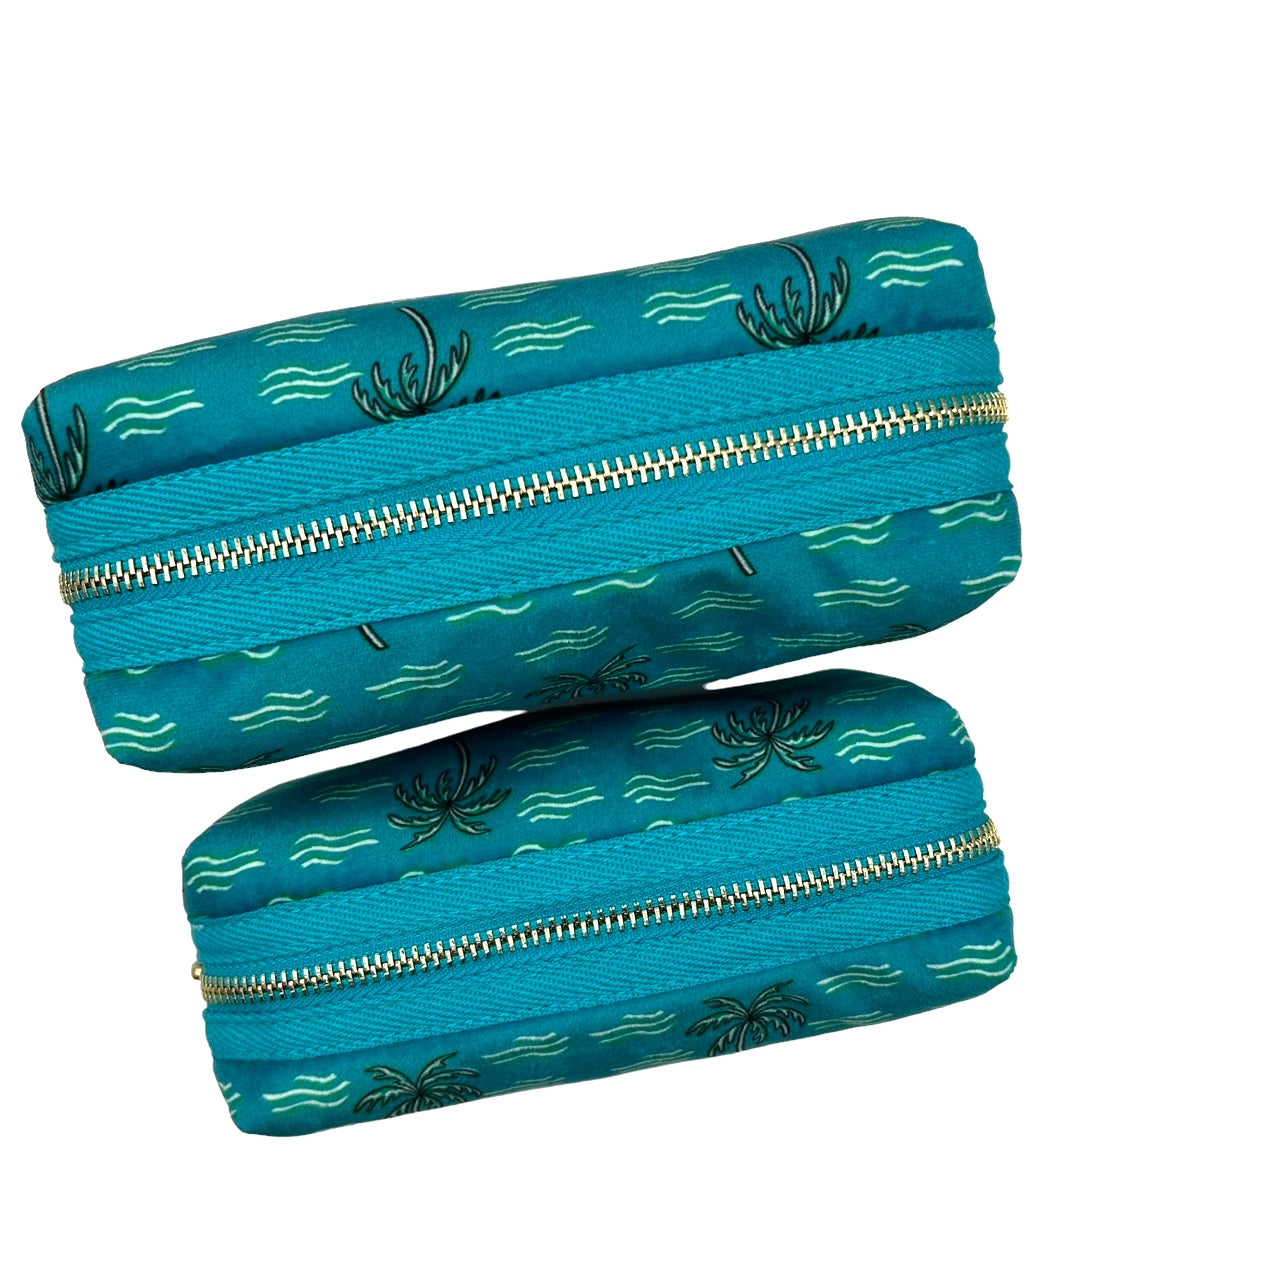 Teal palm large make-up bag & gold lashes brooch - recycled velvet, large and small